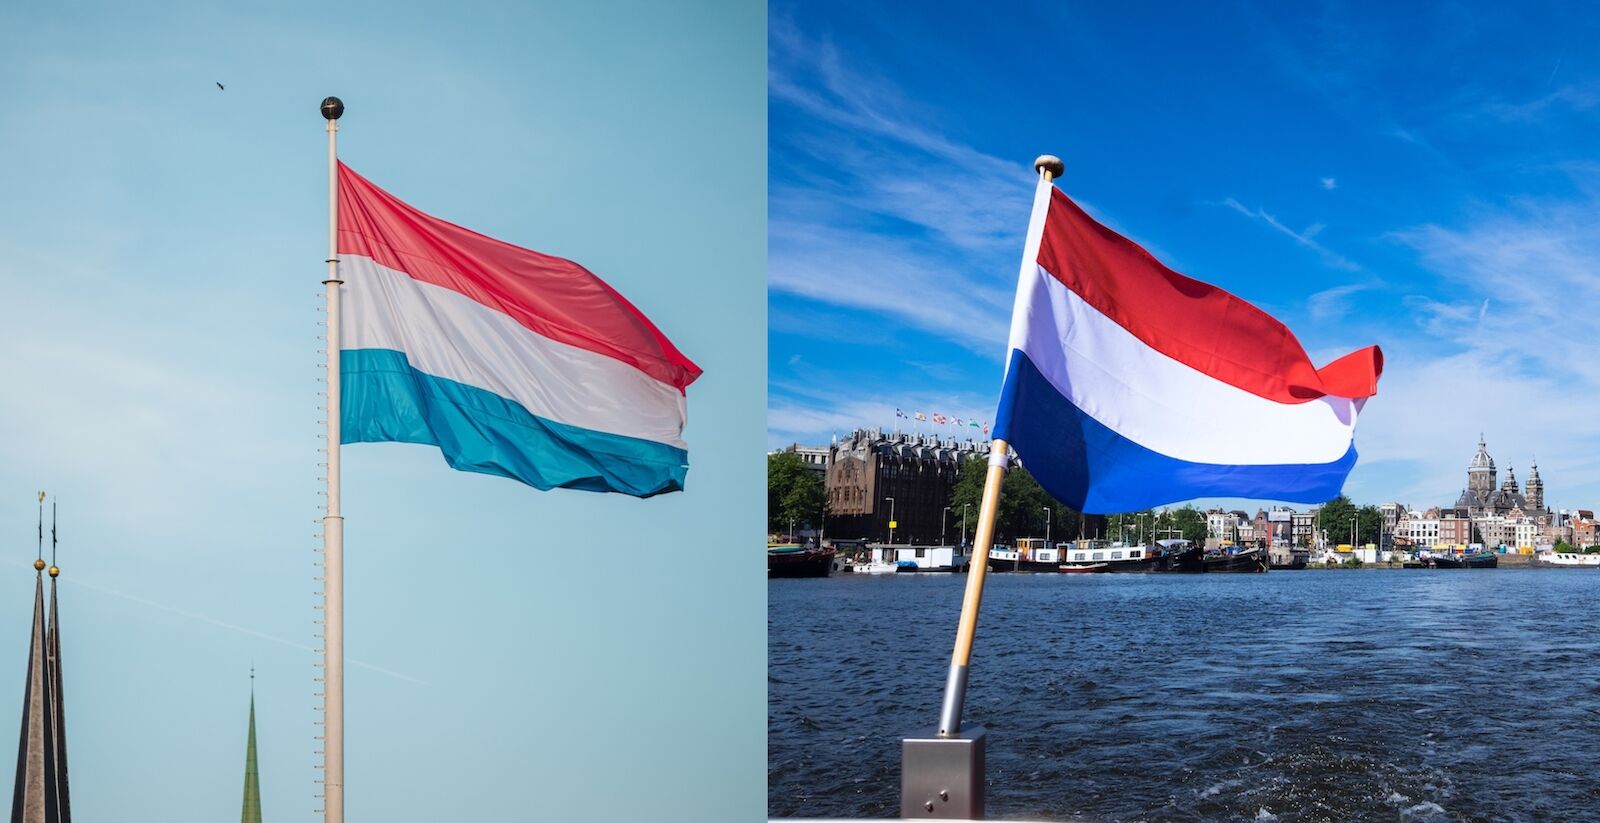 Flag of Luxembourg and flag of the Netherlands